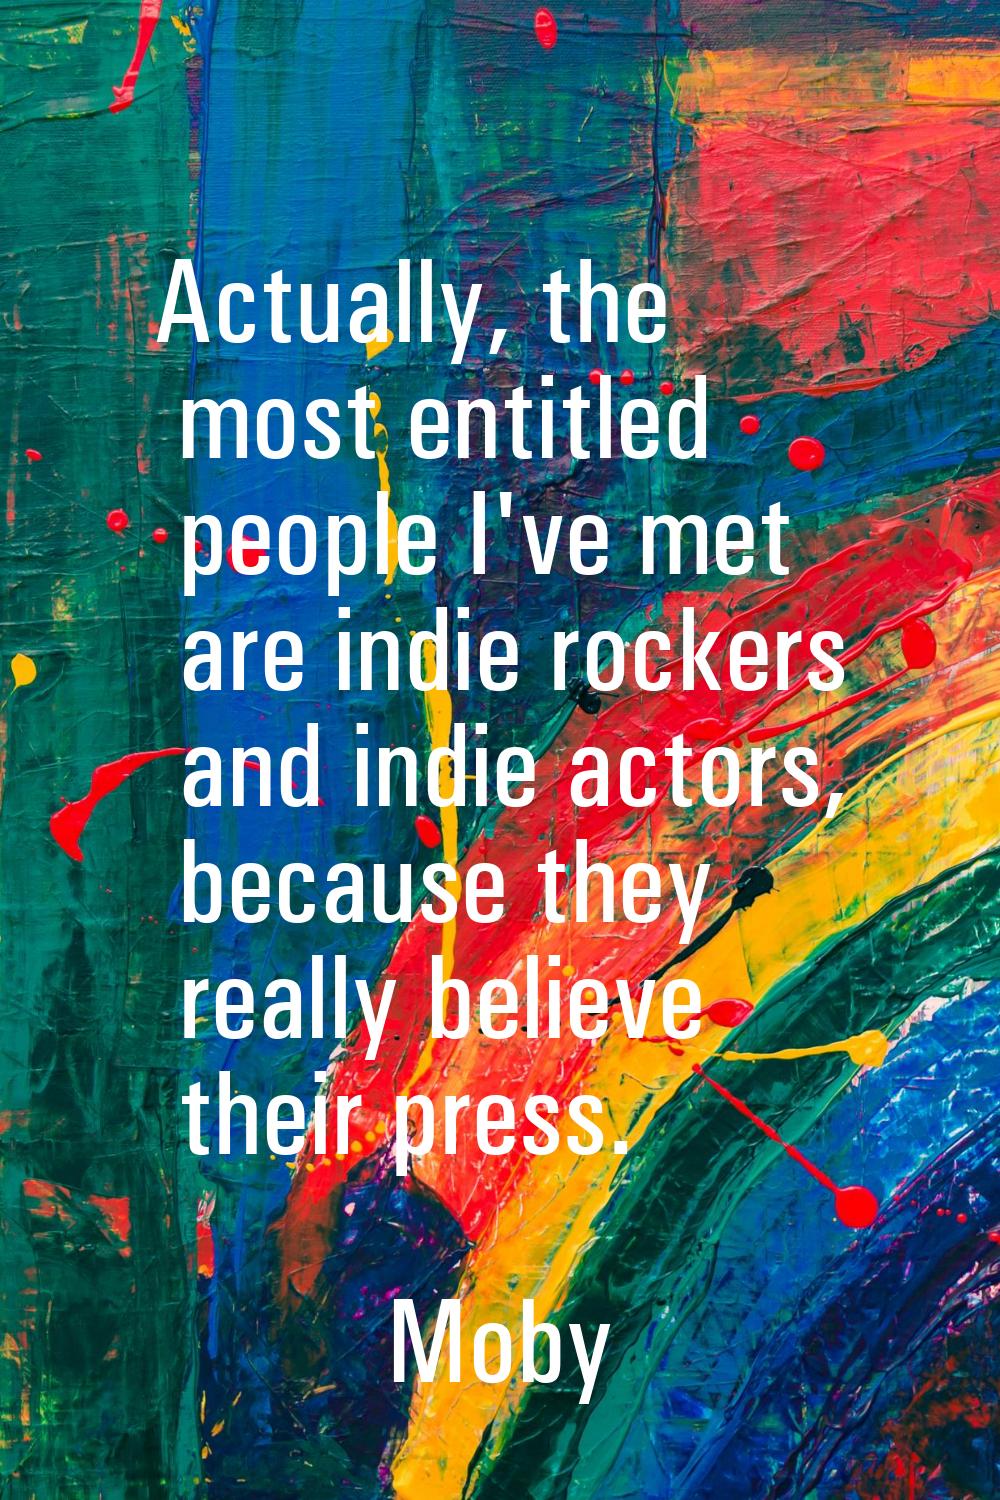 Actually, the most entitled people I've met are indie rockers and indie actors, because they really